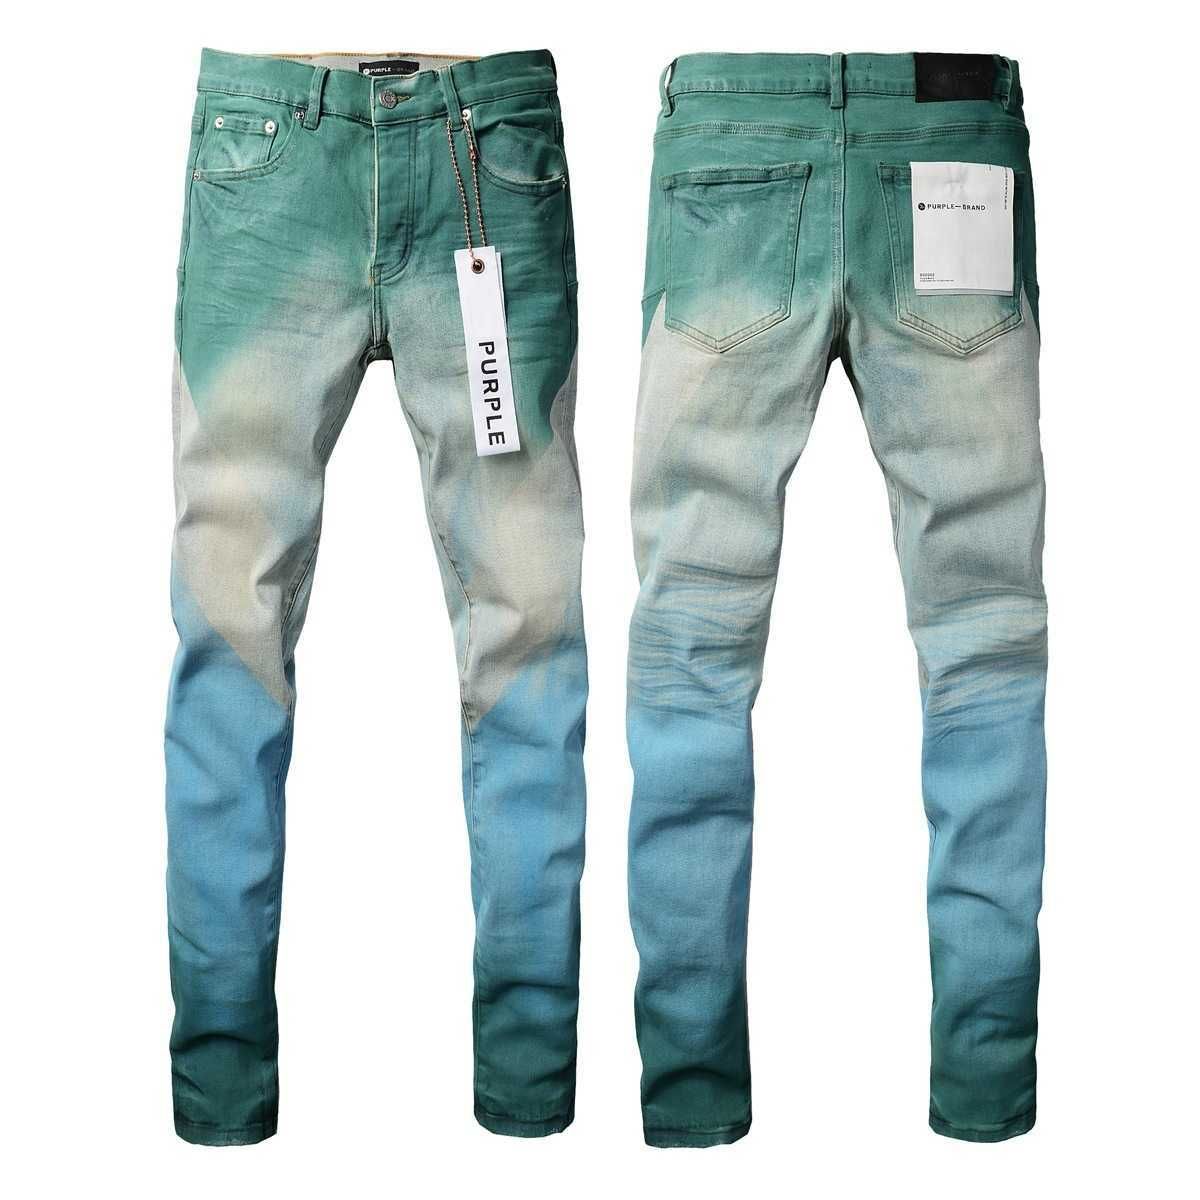 Jeans style 40